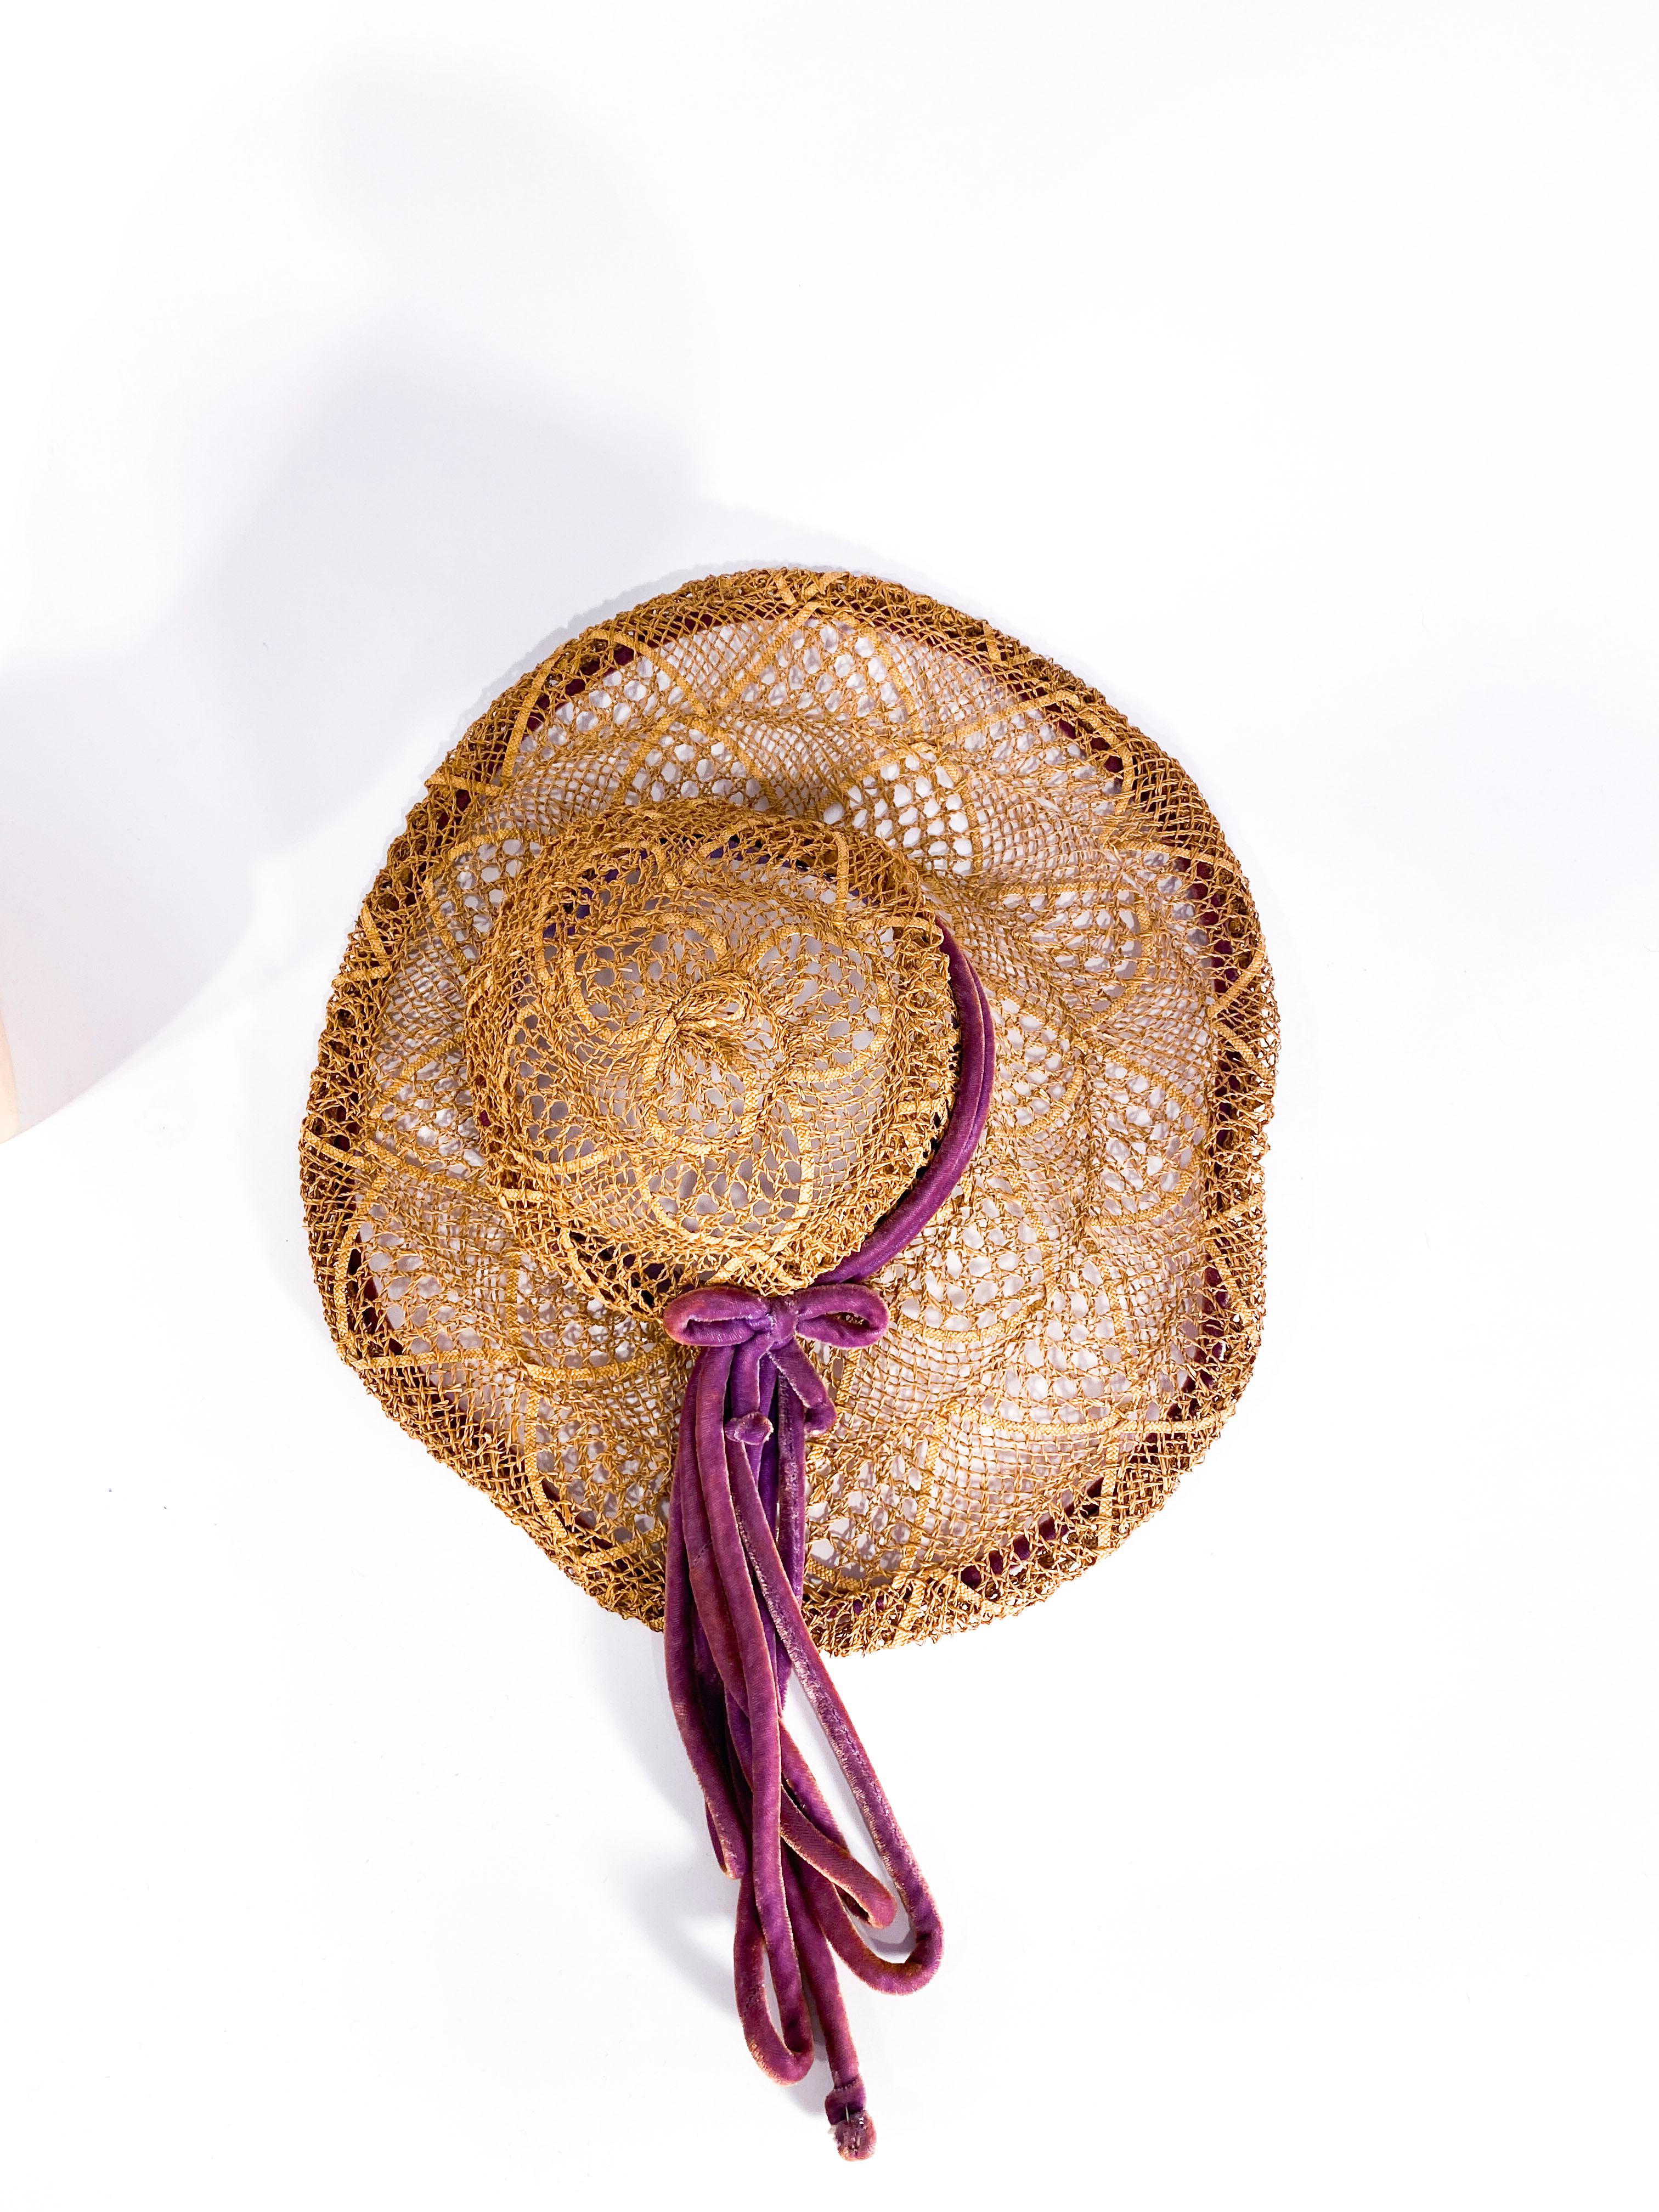 Women's 1930s Woven Straw Summer Picture Hat with Purple Velvet Cord Accent